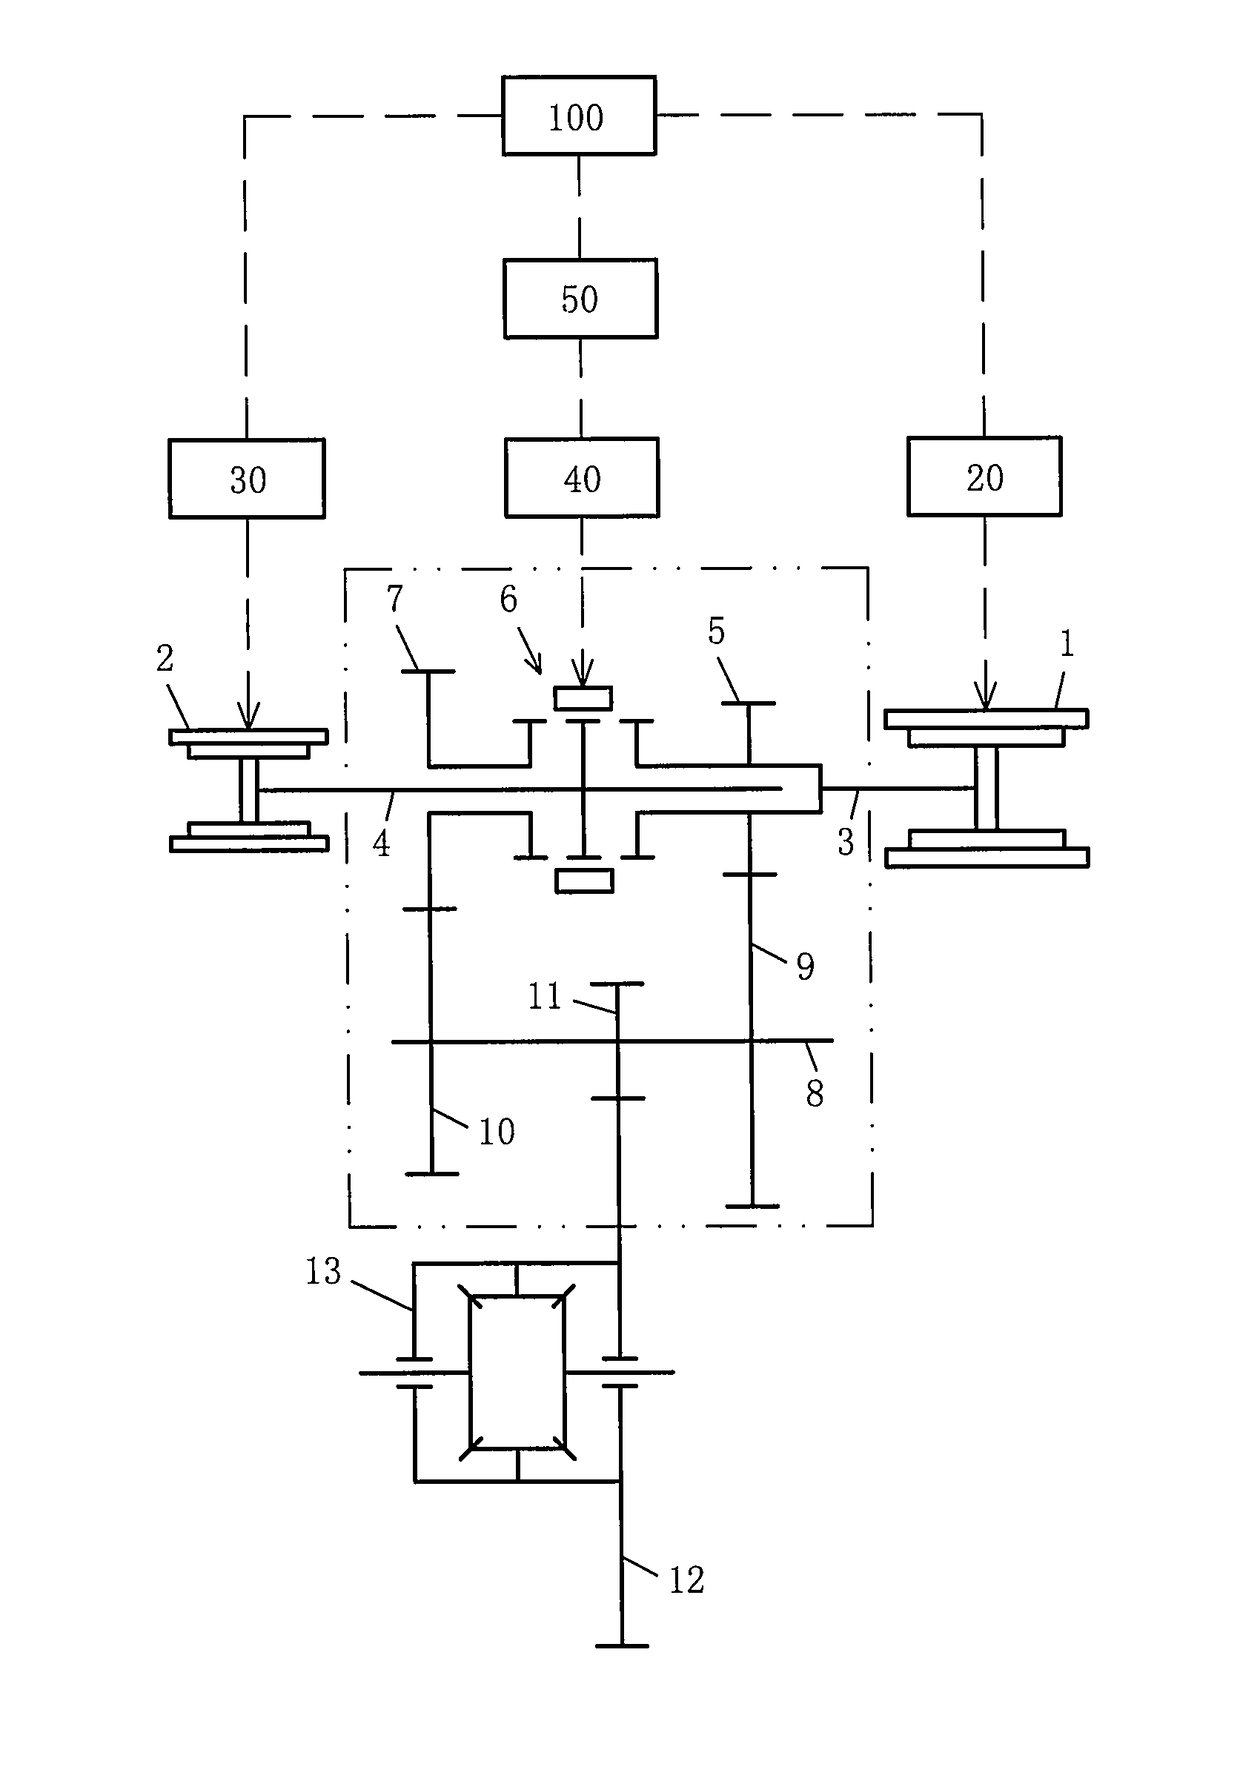 Controlling apparatus and method for electric drive transmission of dual-motor electric vehicle